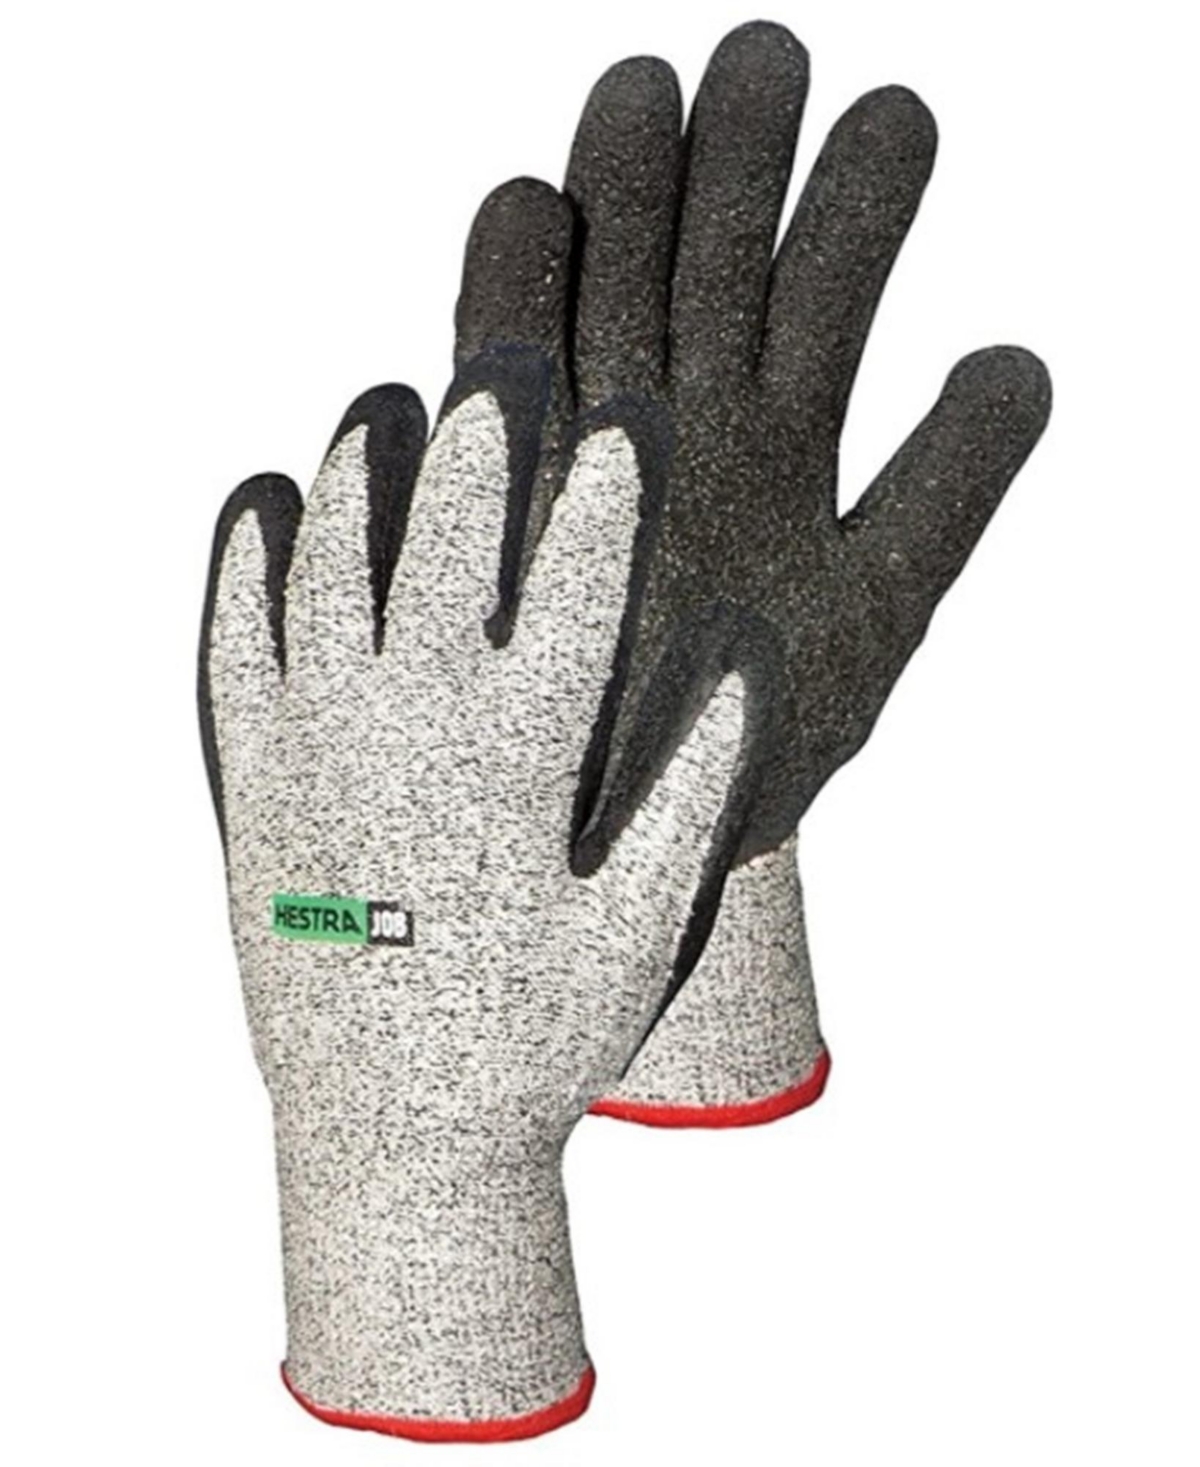 Work Gloves: Latex Cut Resistant Utility Gloves, Grey - Size 11 - Gray